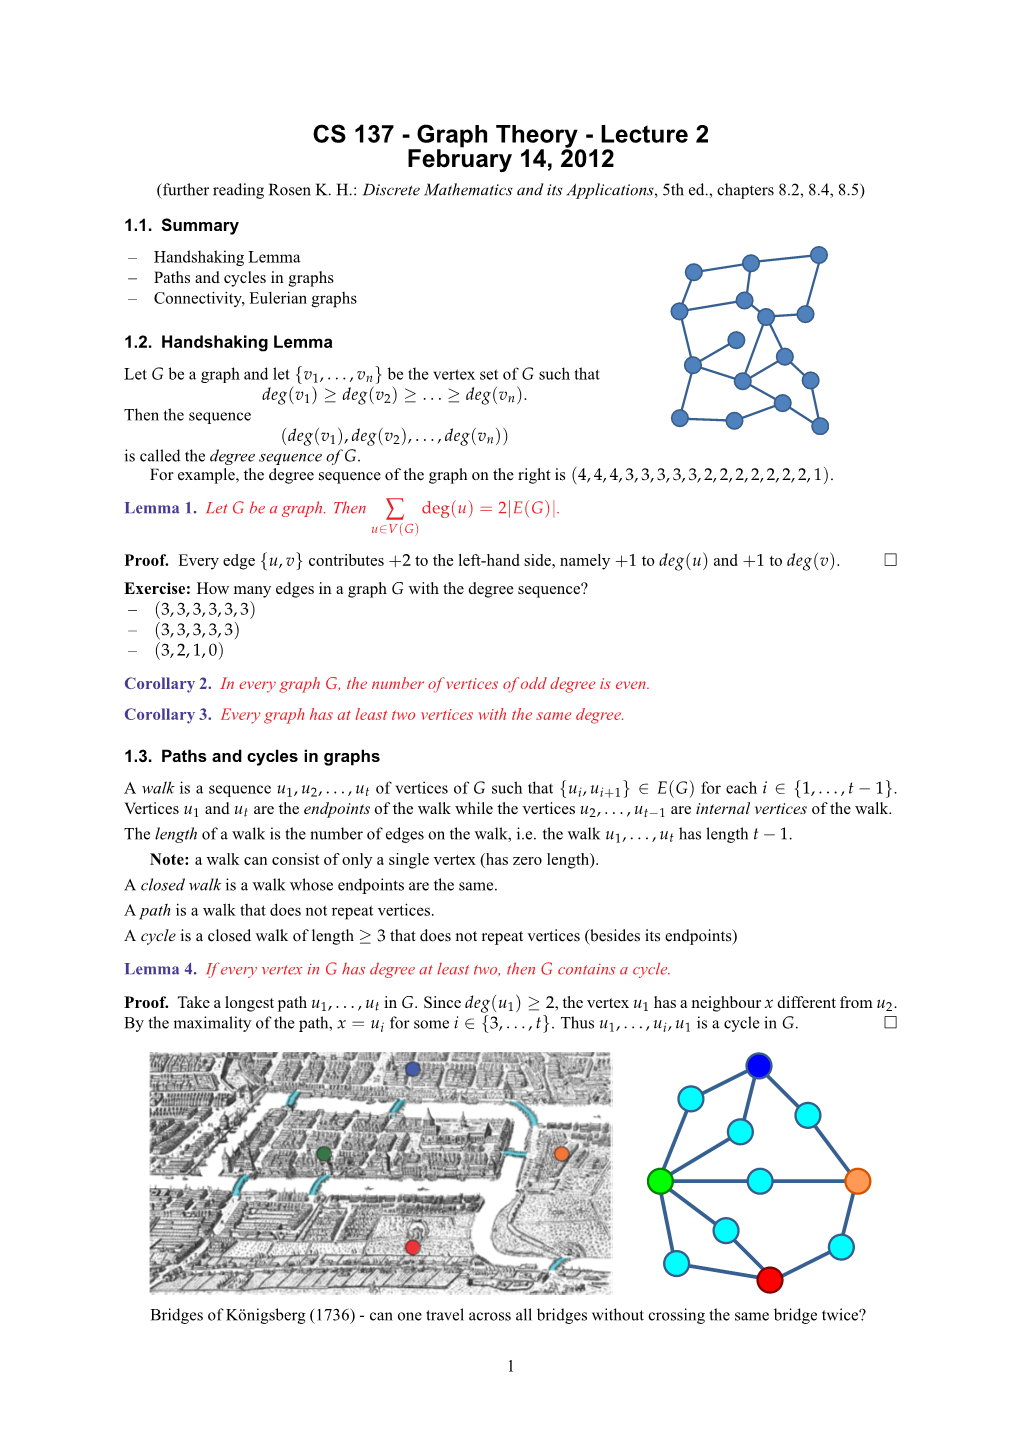 CS 137 - Graph Theory - Lecture 2 February 14, 2012 (Further Reading Rosen K